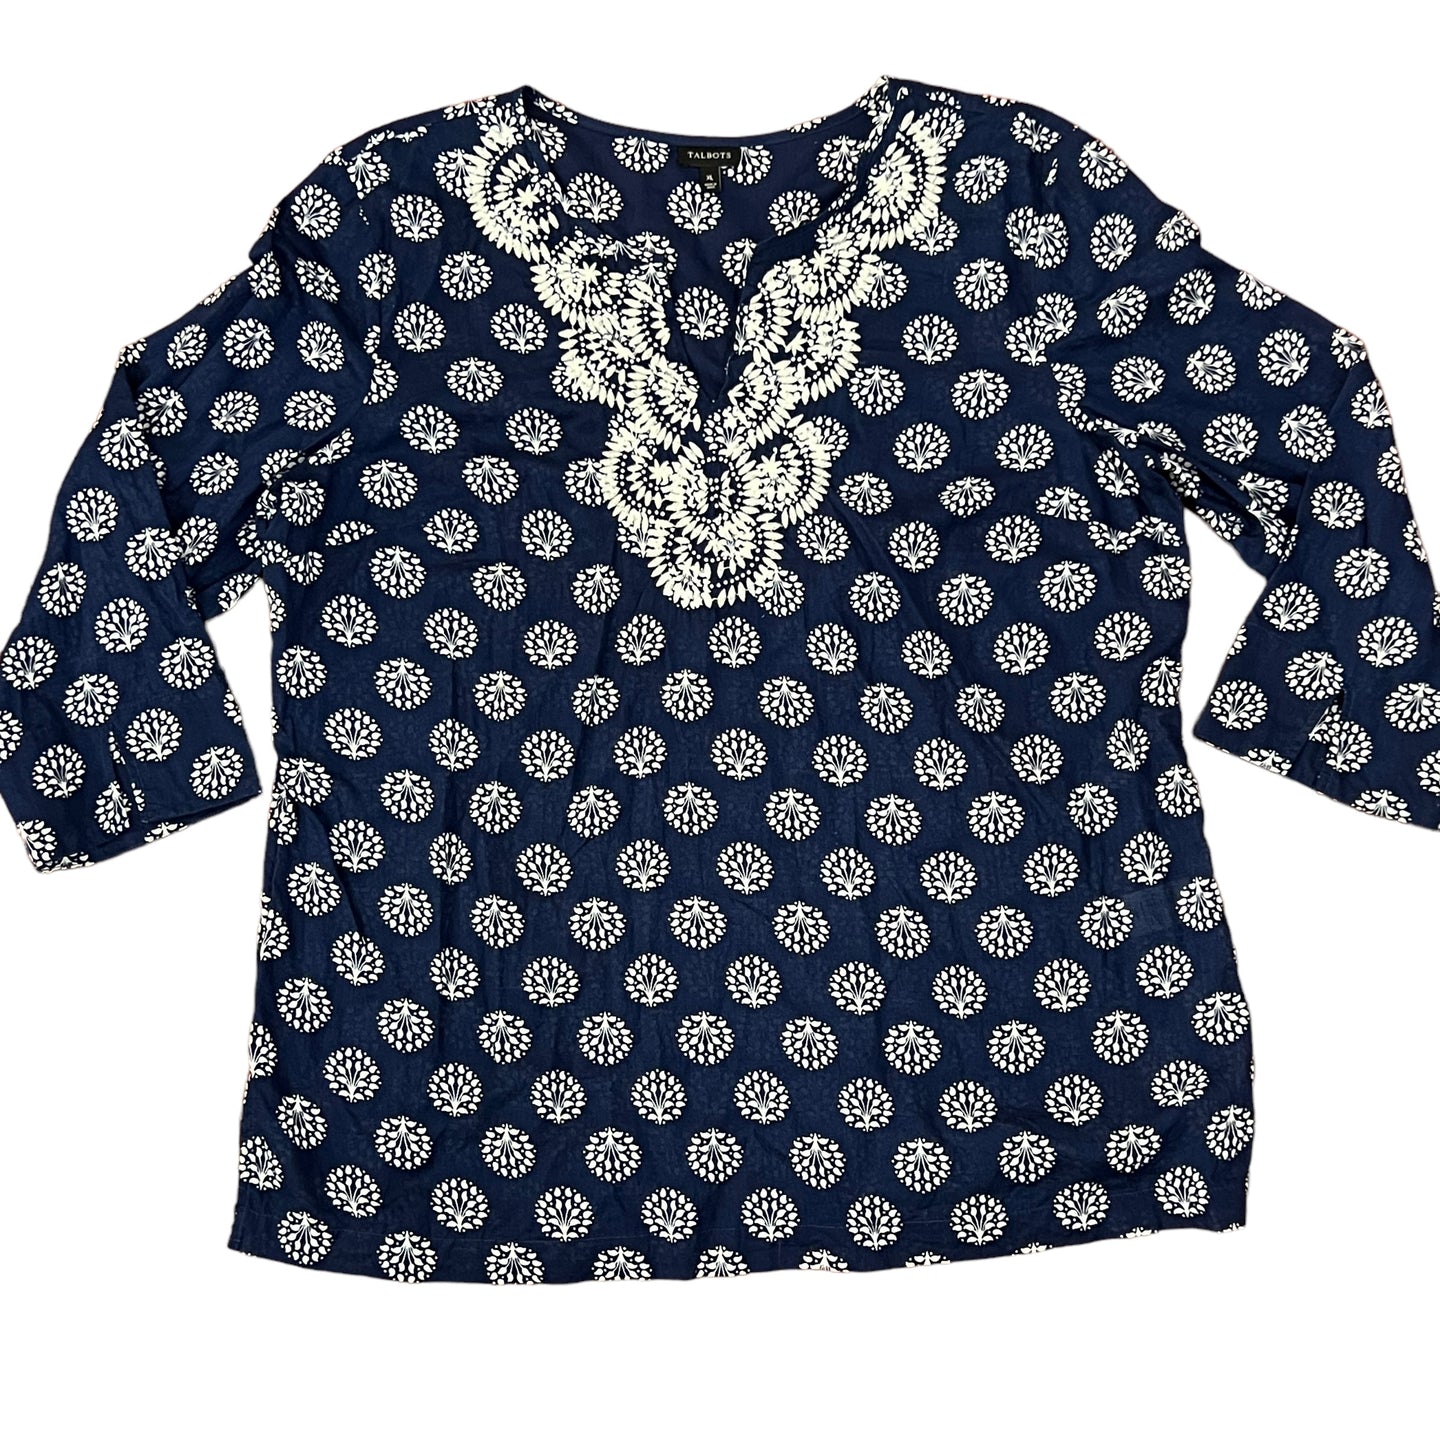 Talbots 100% Cotton Embroidered Beaded Navy Blue Tunic Size XL